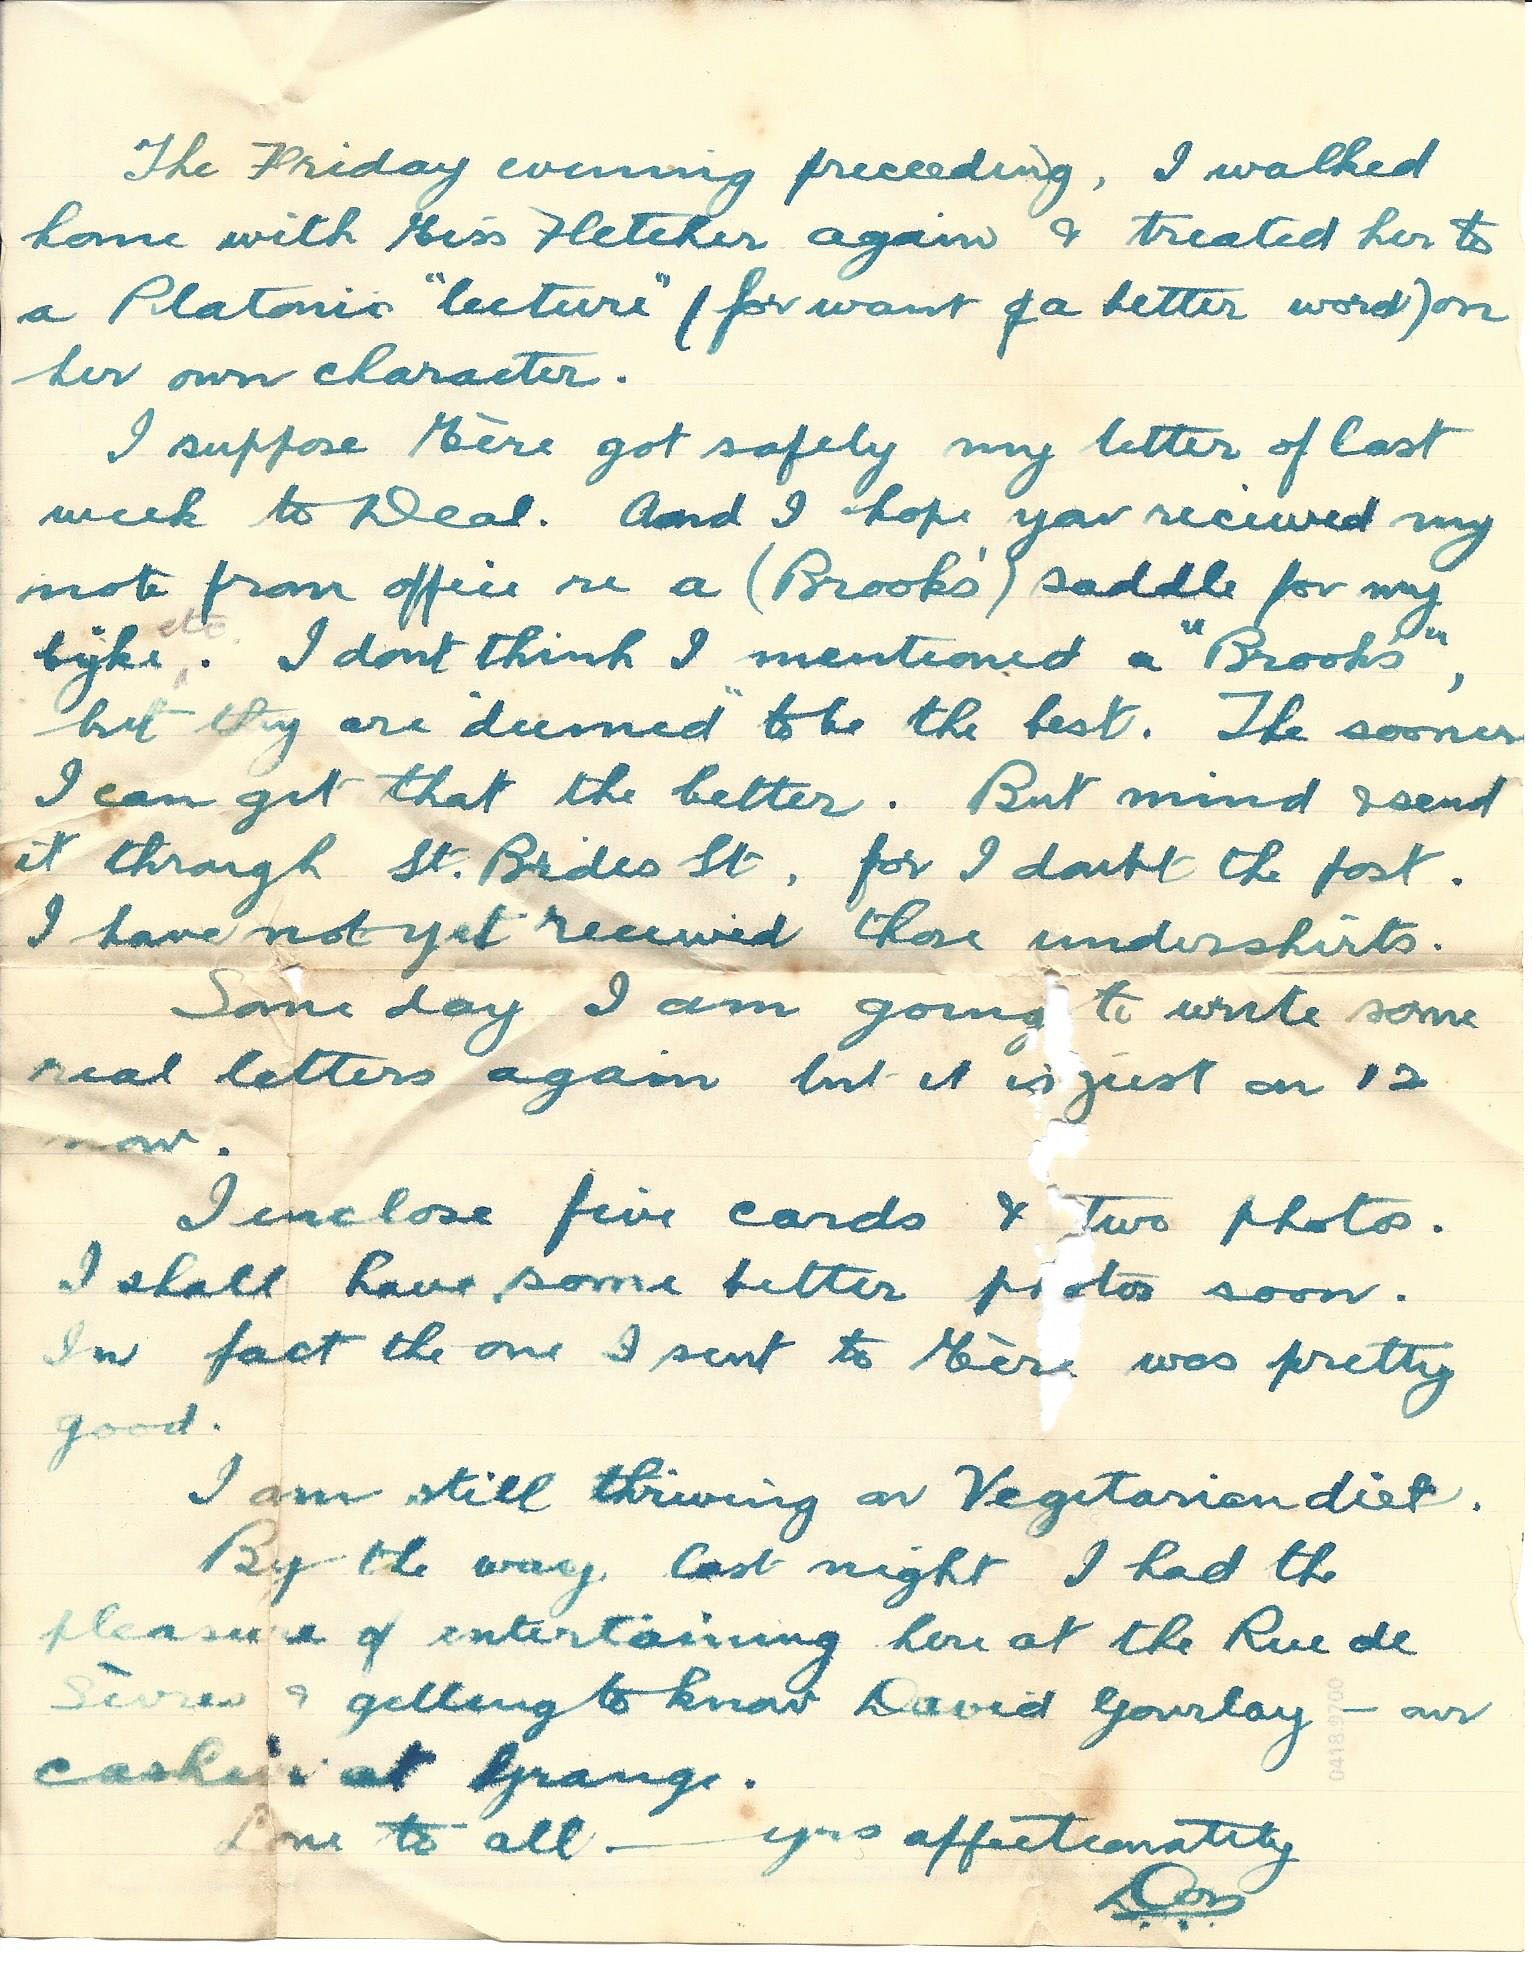 1919-09-16 p2 Donald Bearman letter to his father